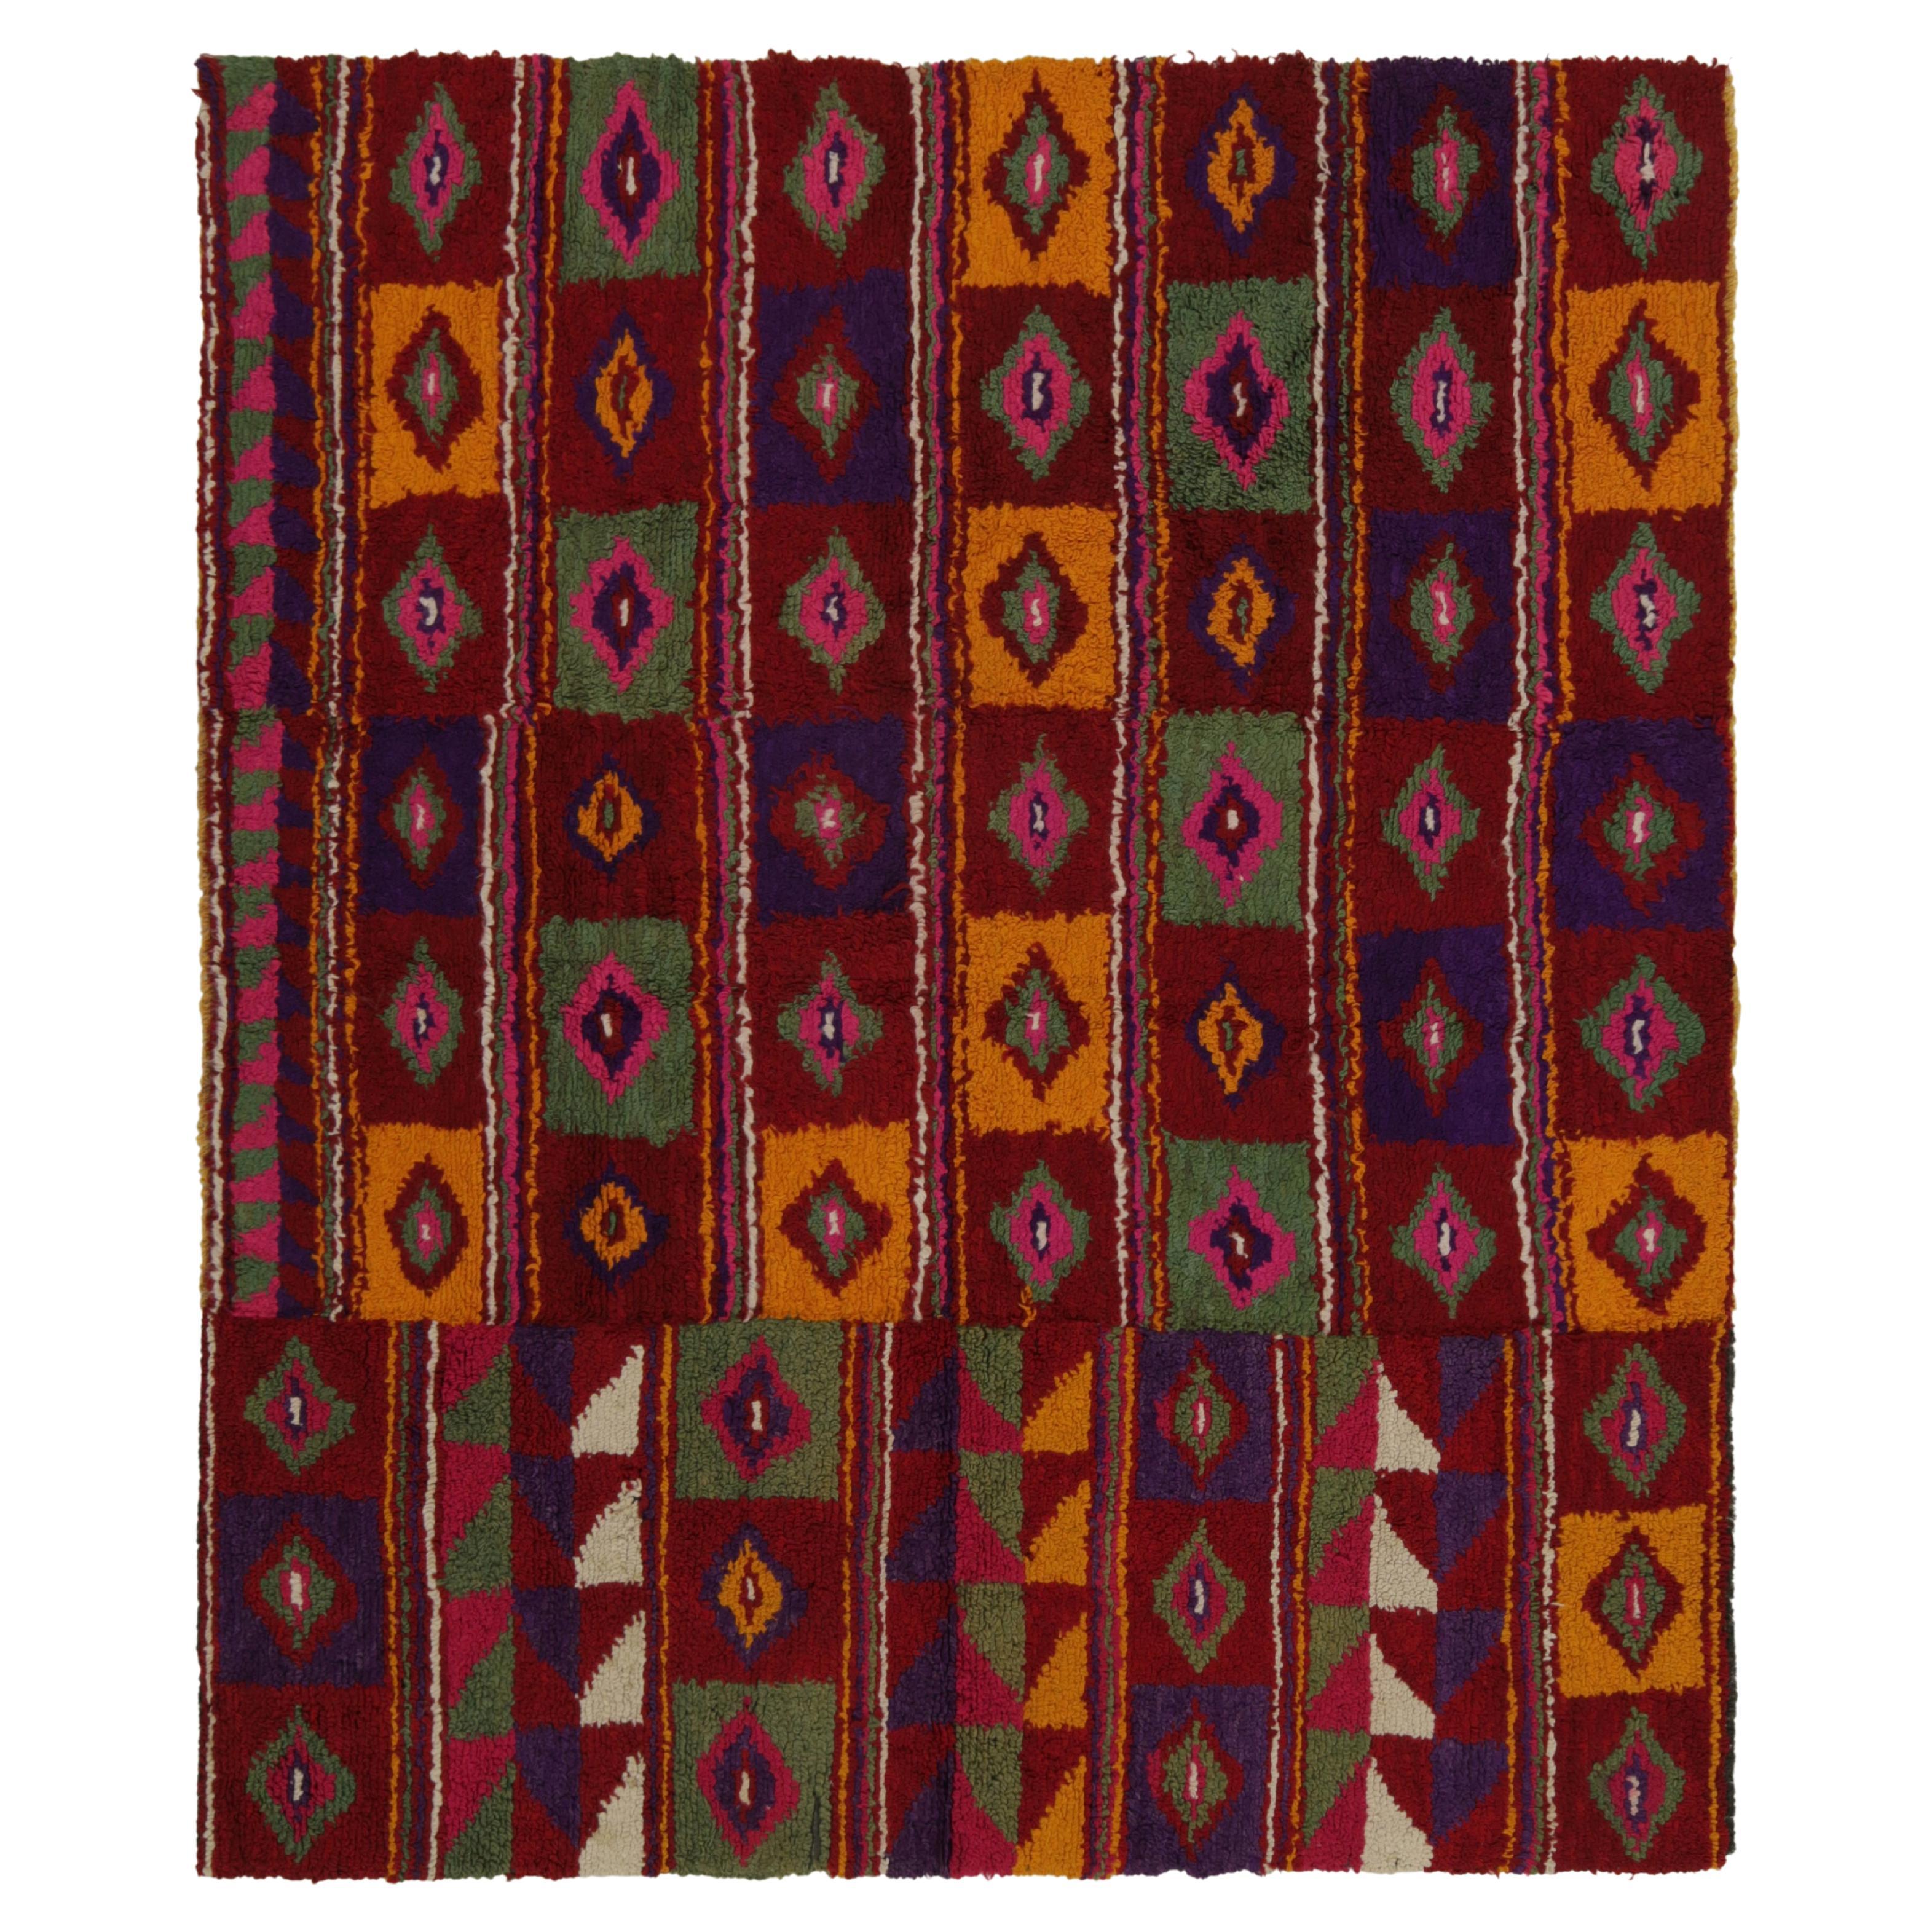 Vintage Tulu Tribal Rug in Red with Polychromatic Diamond Patterns